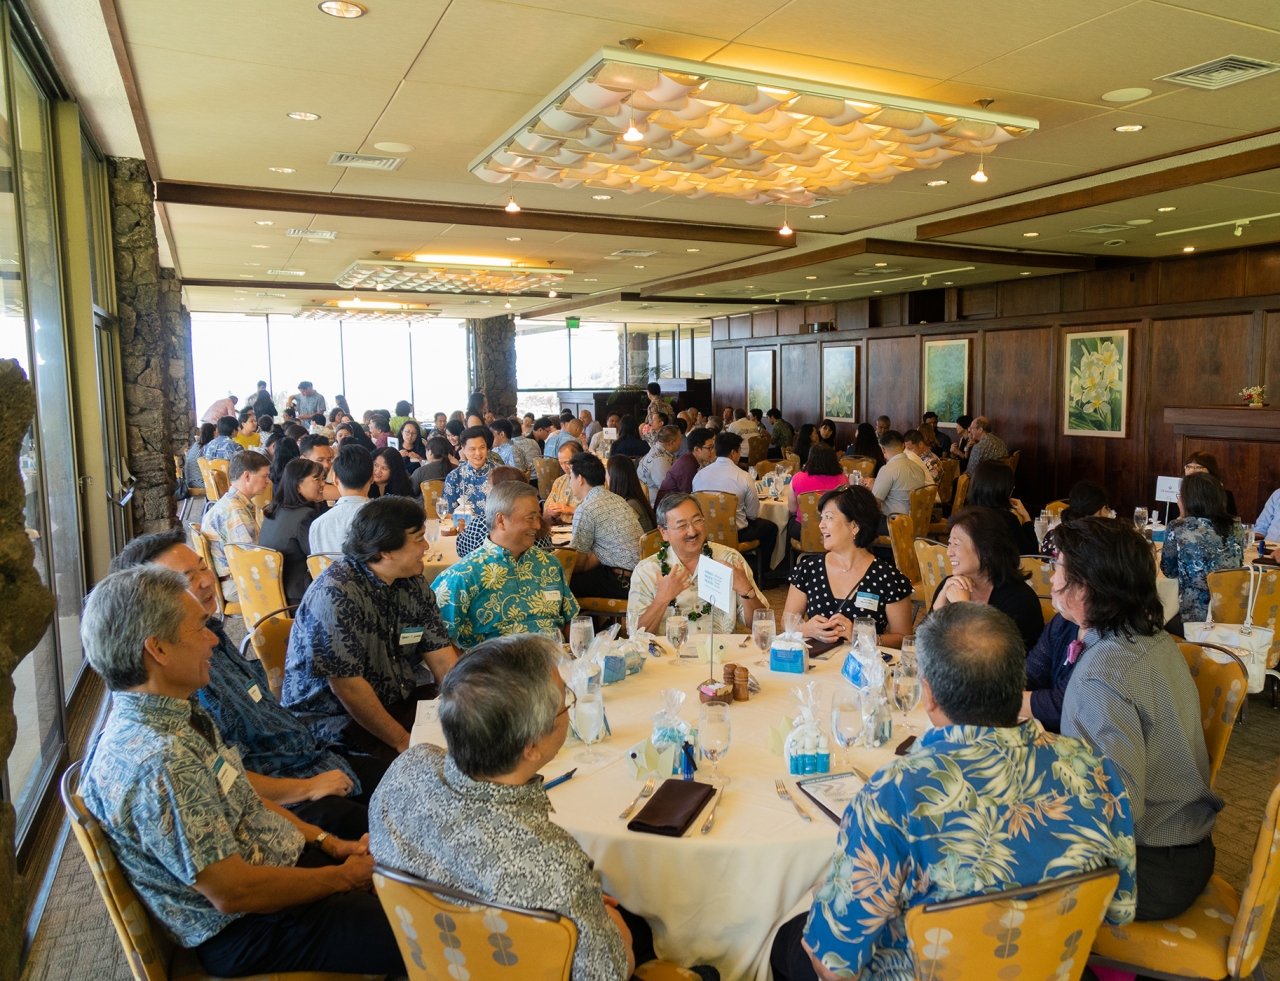 Over 200 professionals attended a luncheon to support the School of Accountancy.